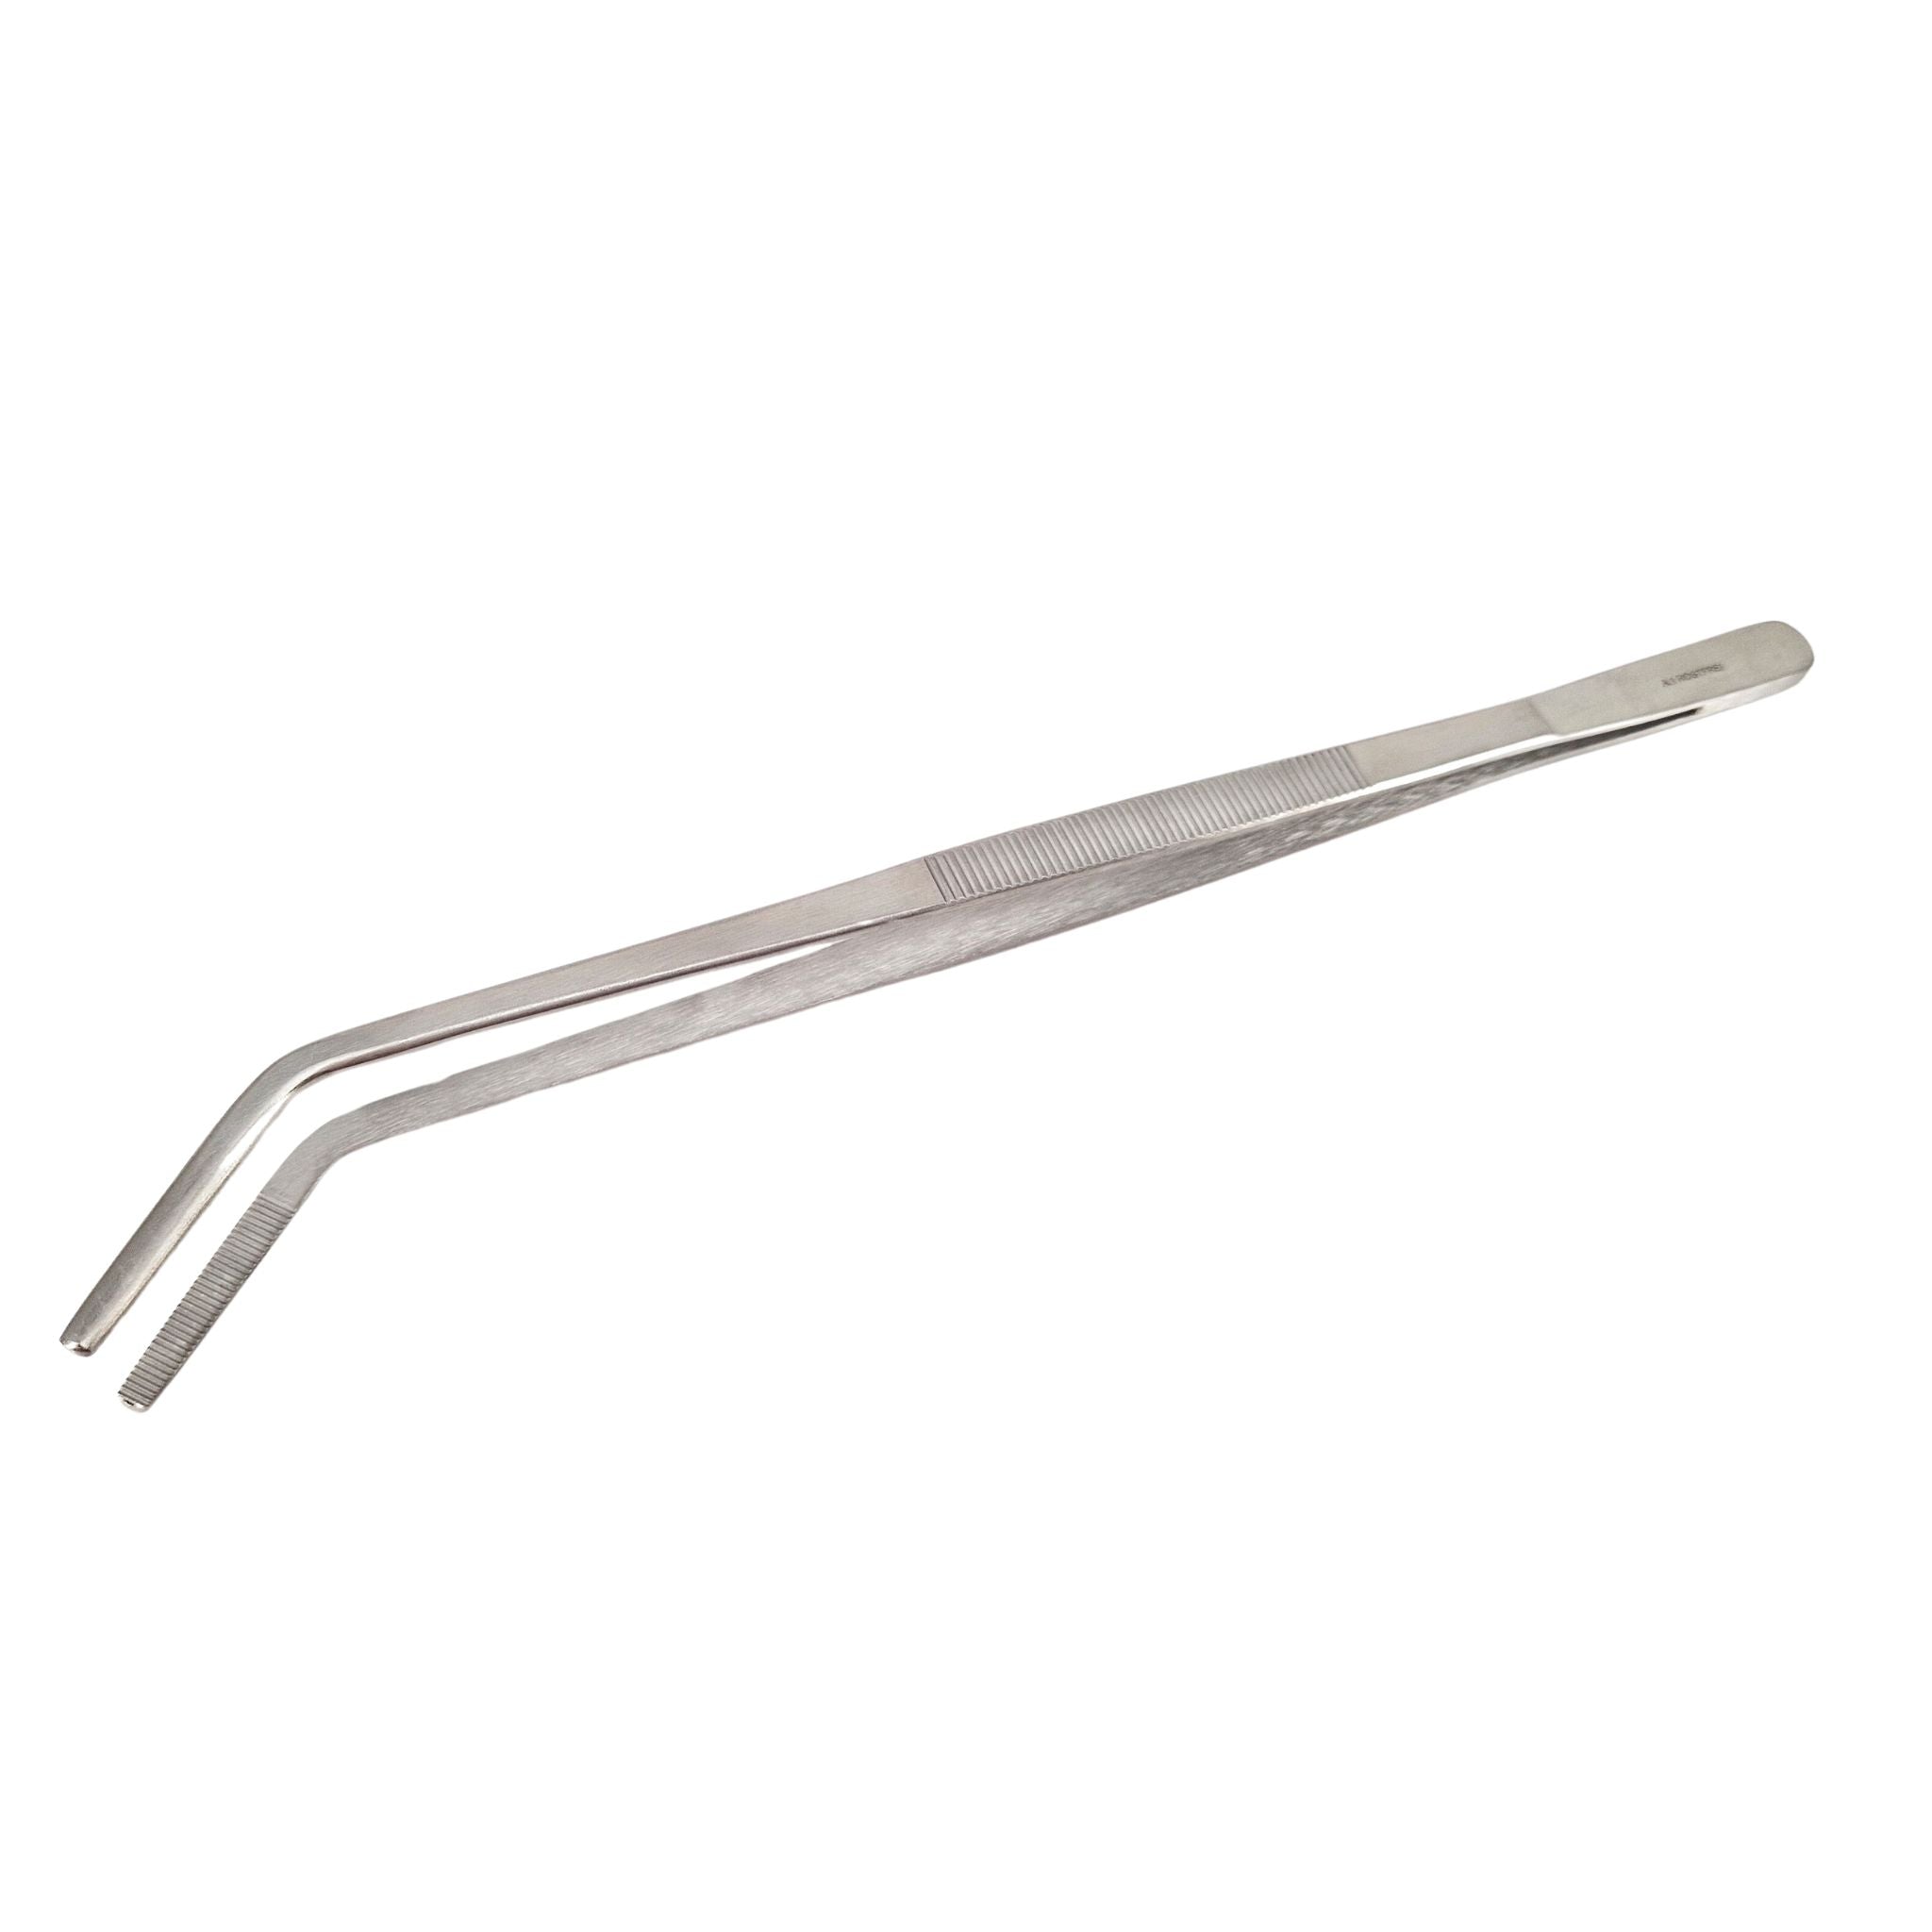 Lavabis dissecting forceps angled stainless steel - 0